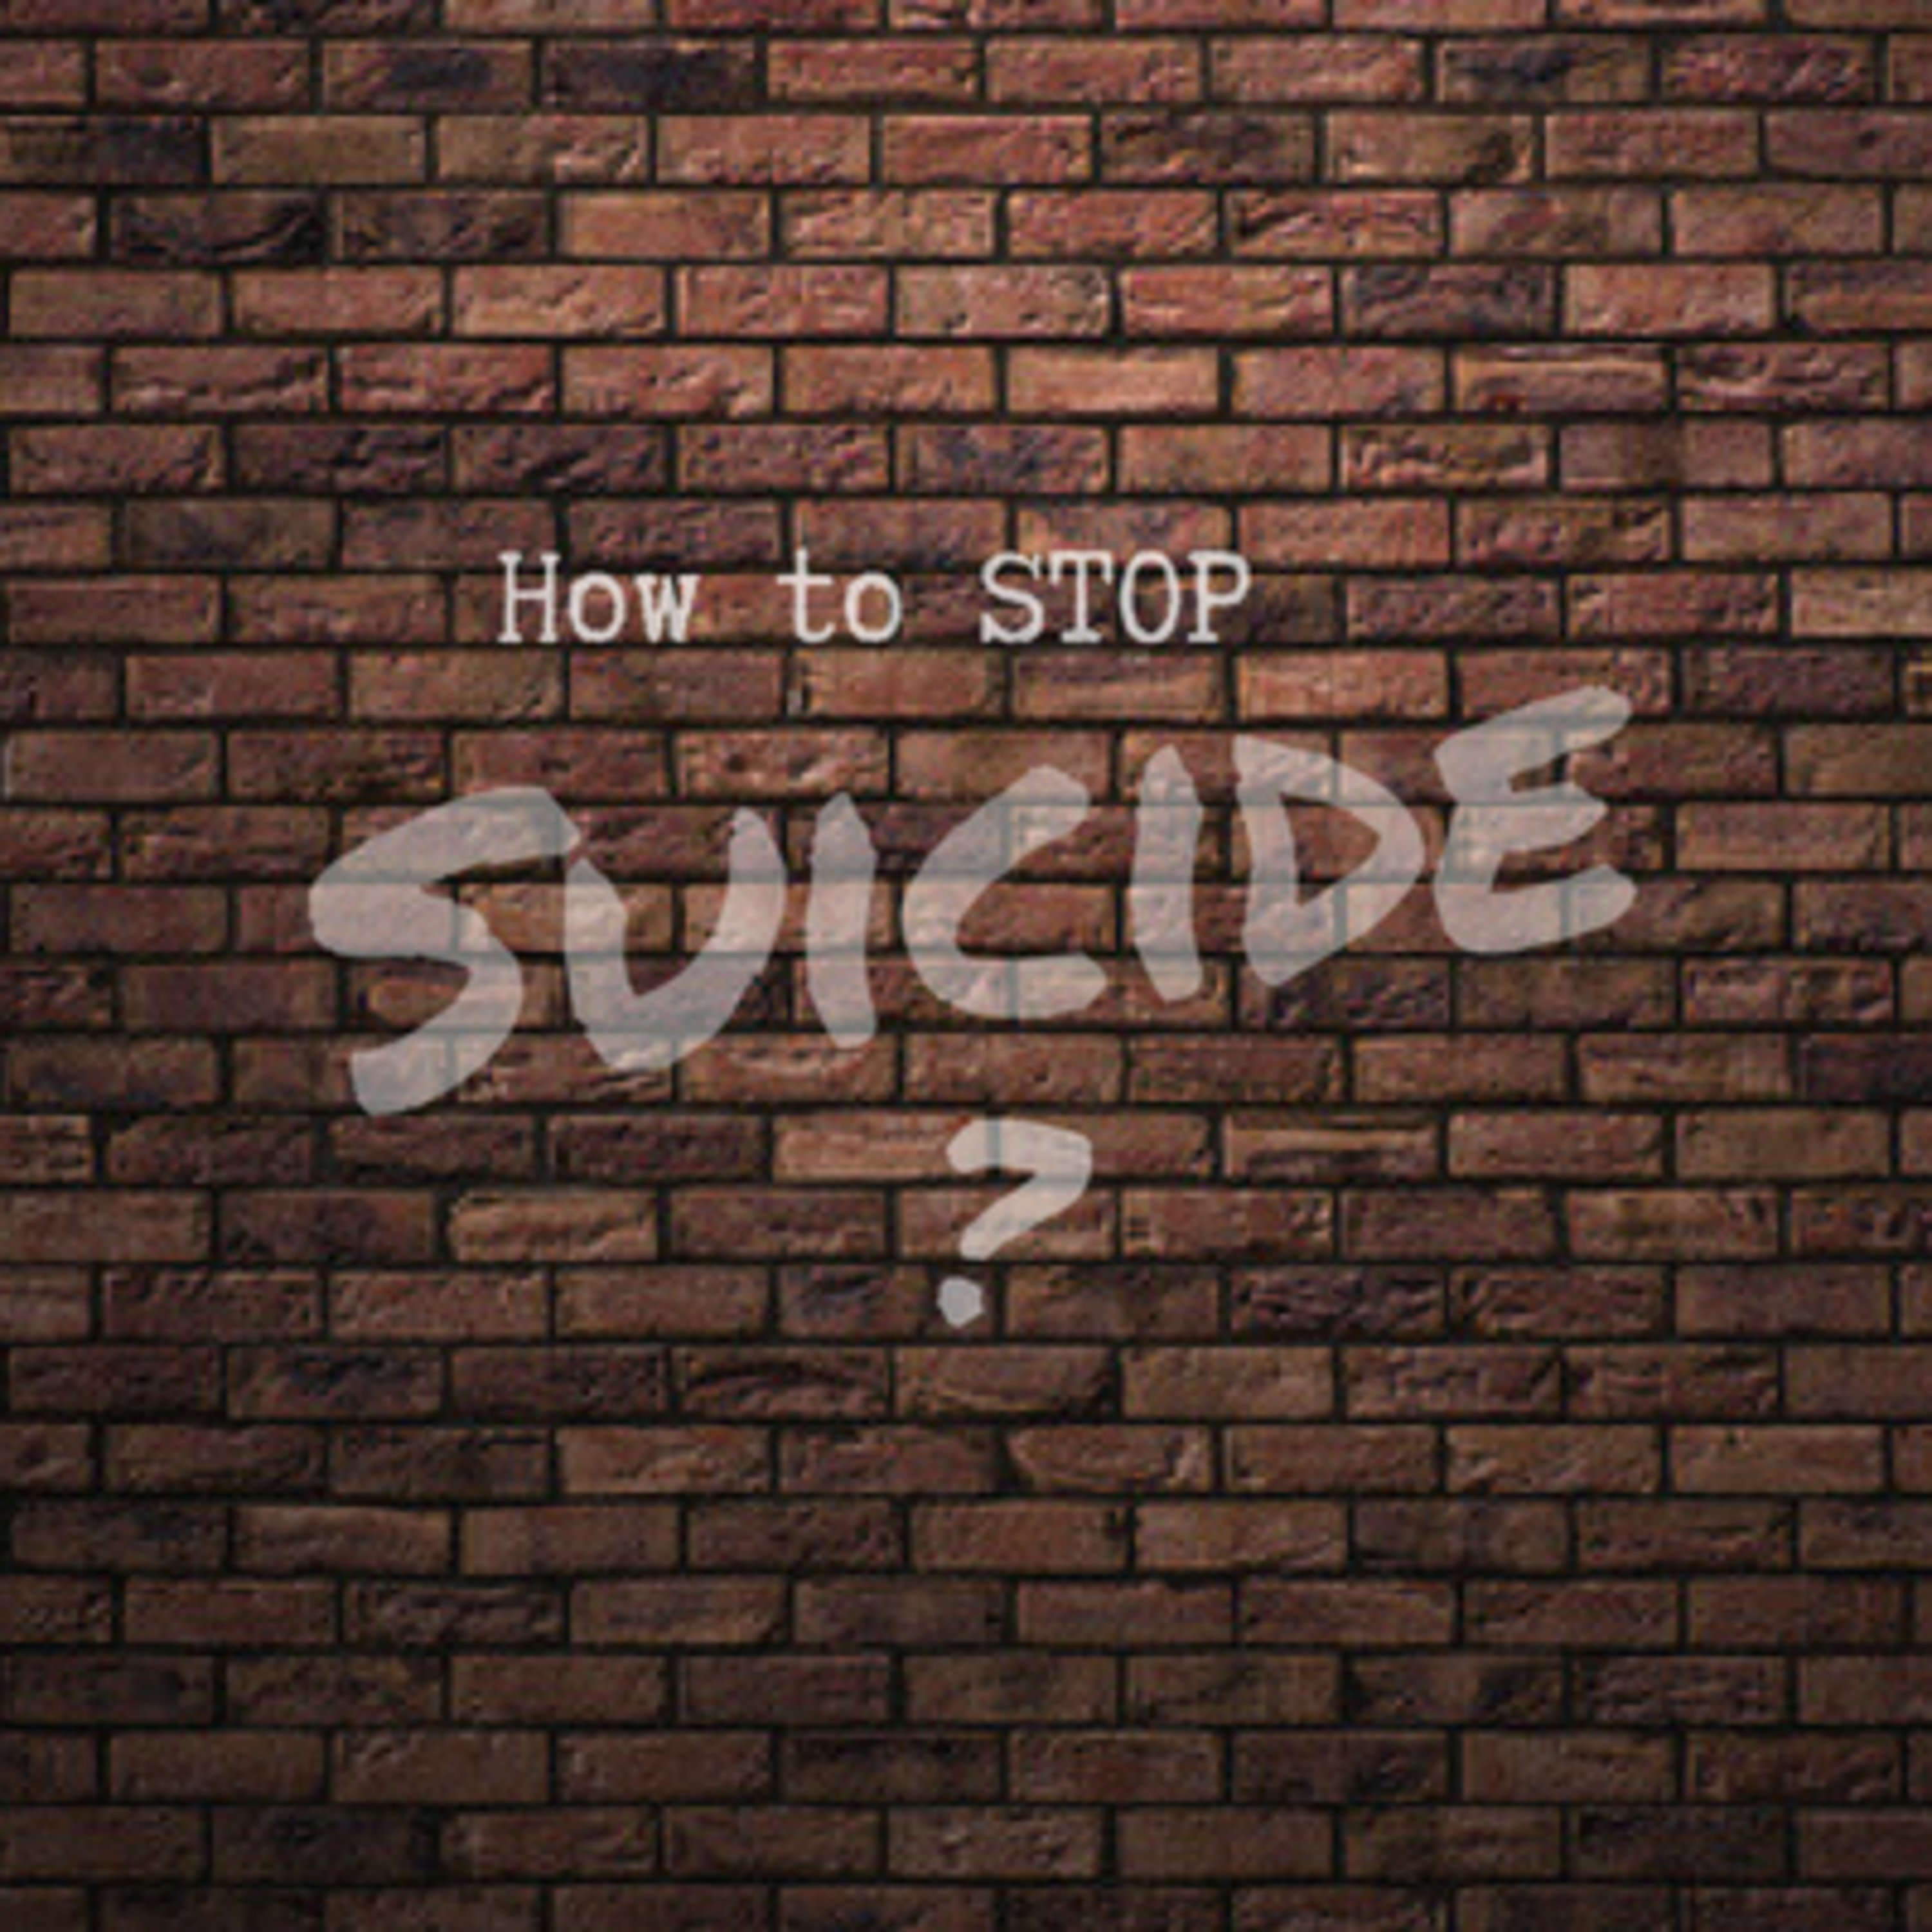 How do we Stop Suicide?